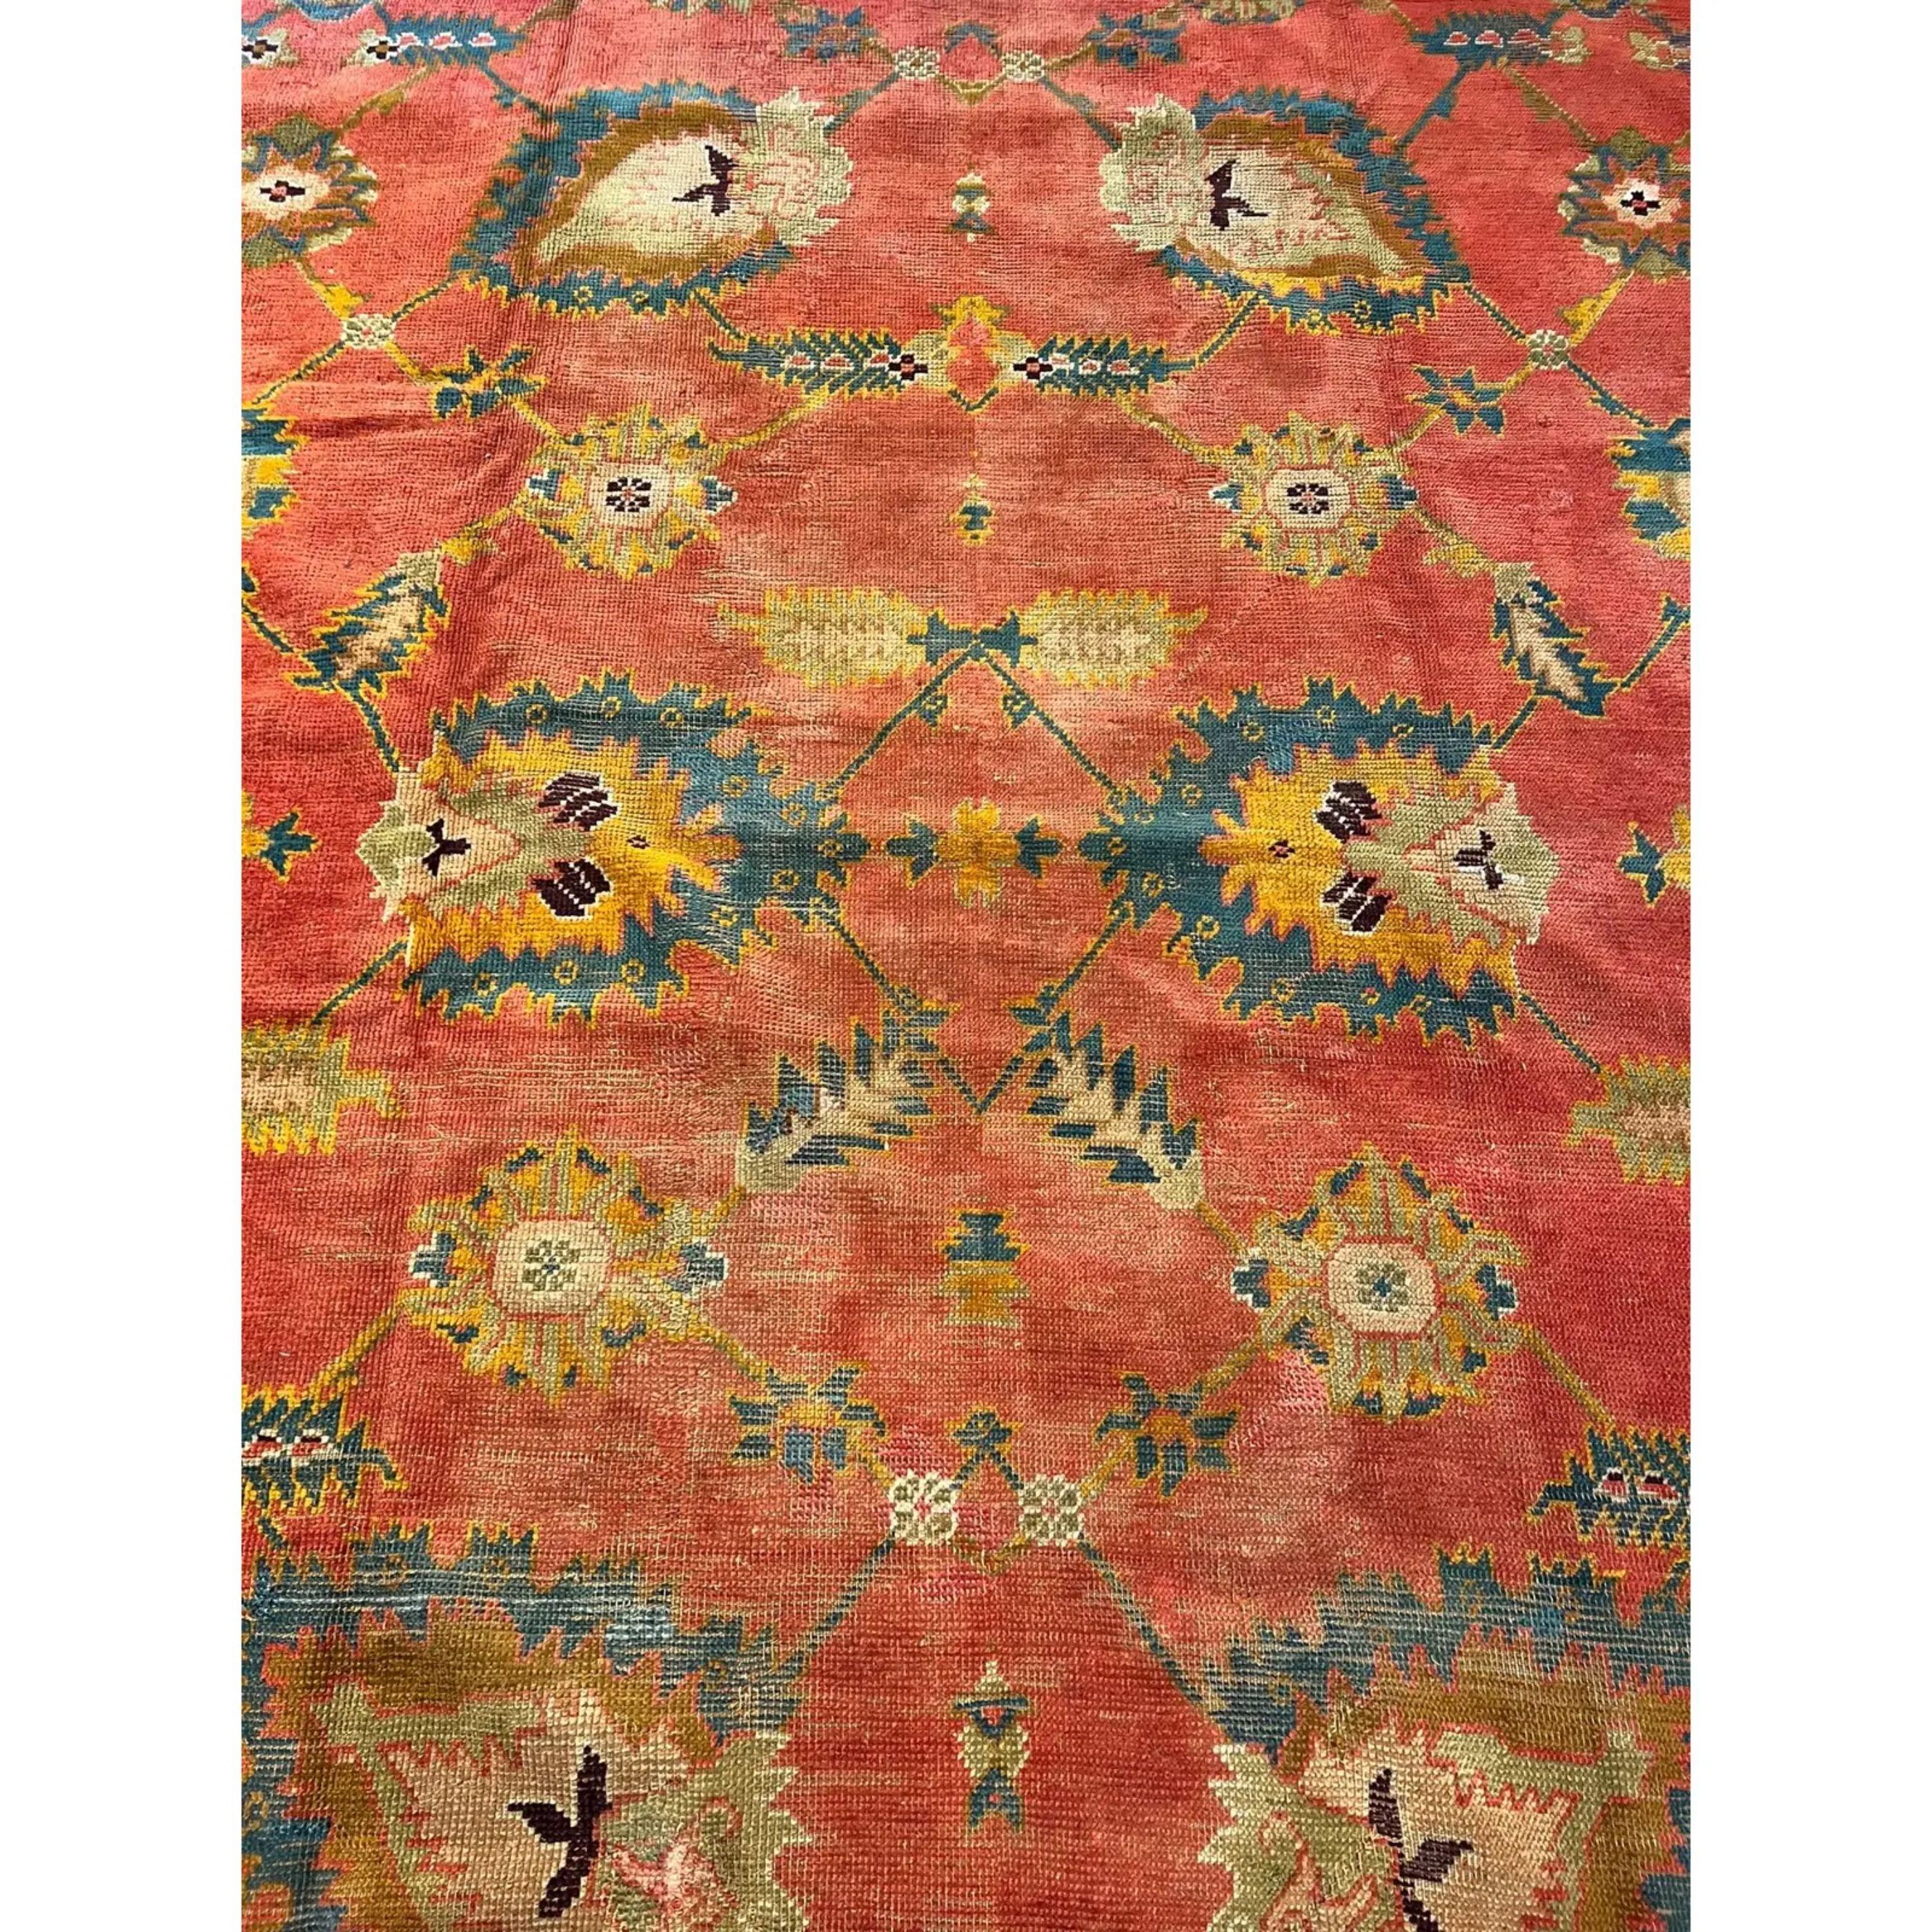 The Oushak rugs have become the rugs of choice for many of the top interior decorators in the world today. Just open any copy of architectural digest and you will see these magnificent carpets adorn the floors of many bedrooms, family rooms and